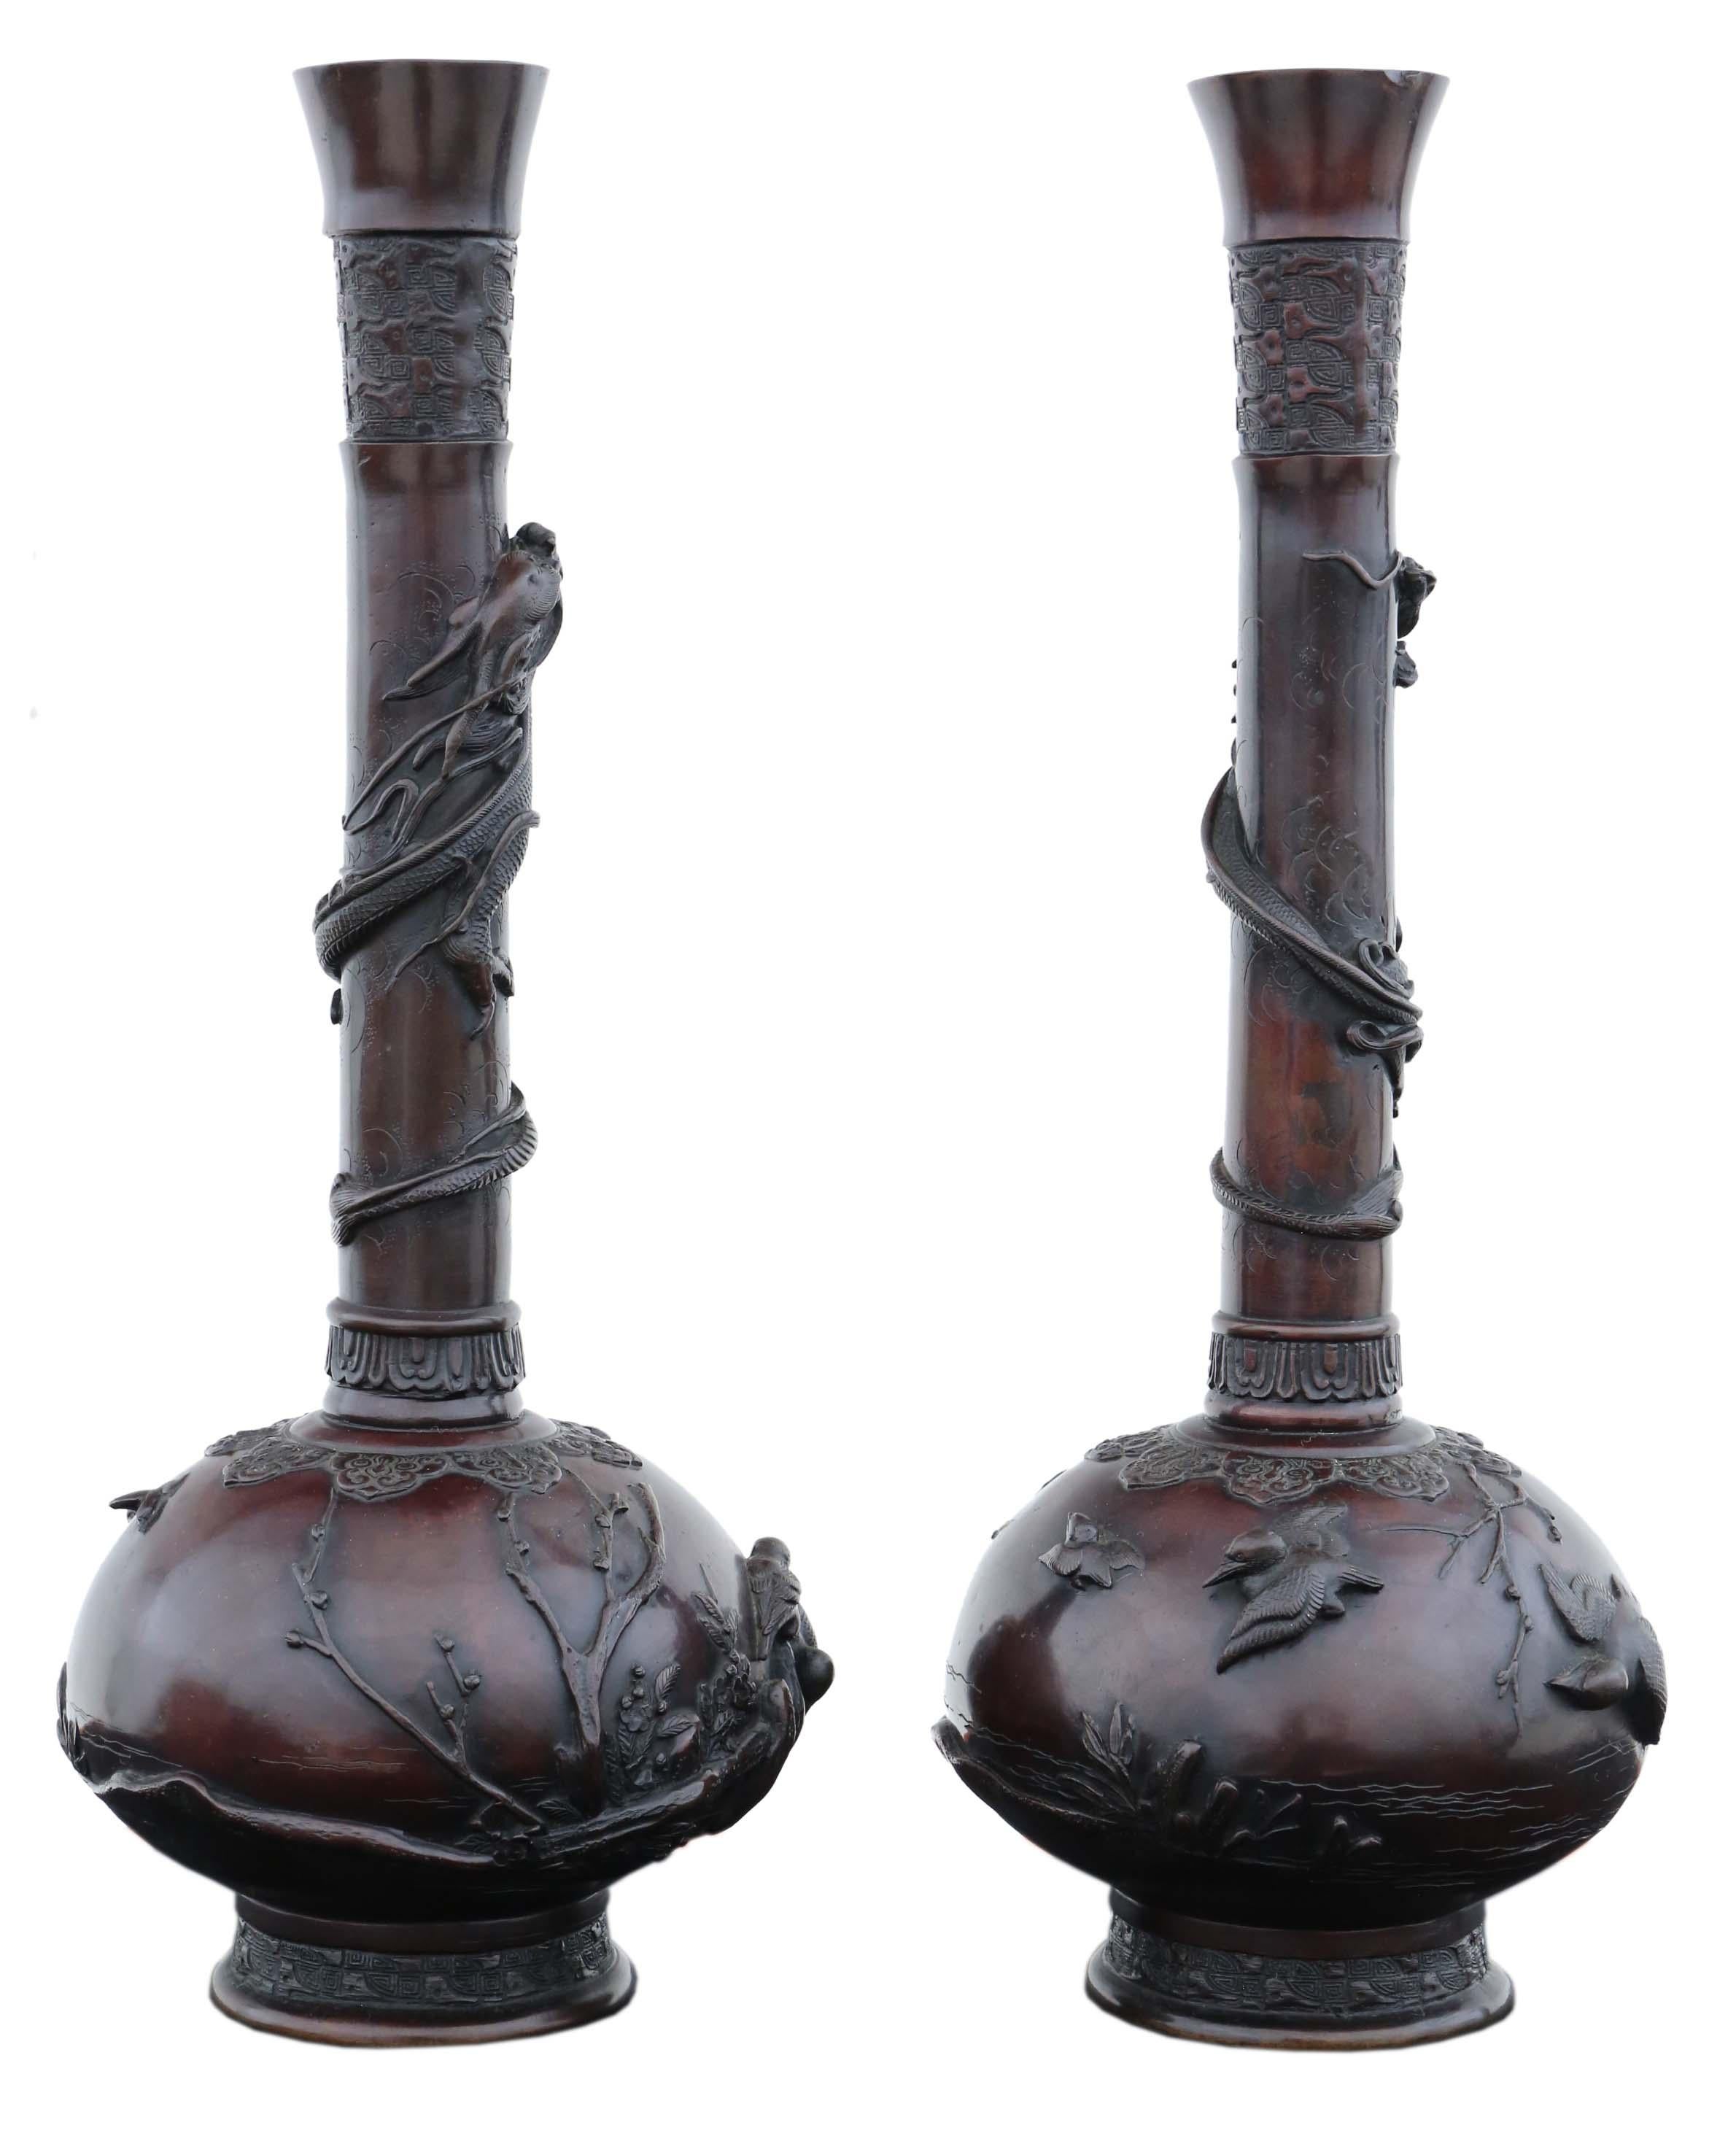 Very Large Pair of Fine Quality Japanese Bronze Vases 19th Century Meiji Period In Good Condition For Sale In Wisbech, Cambridgeshire